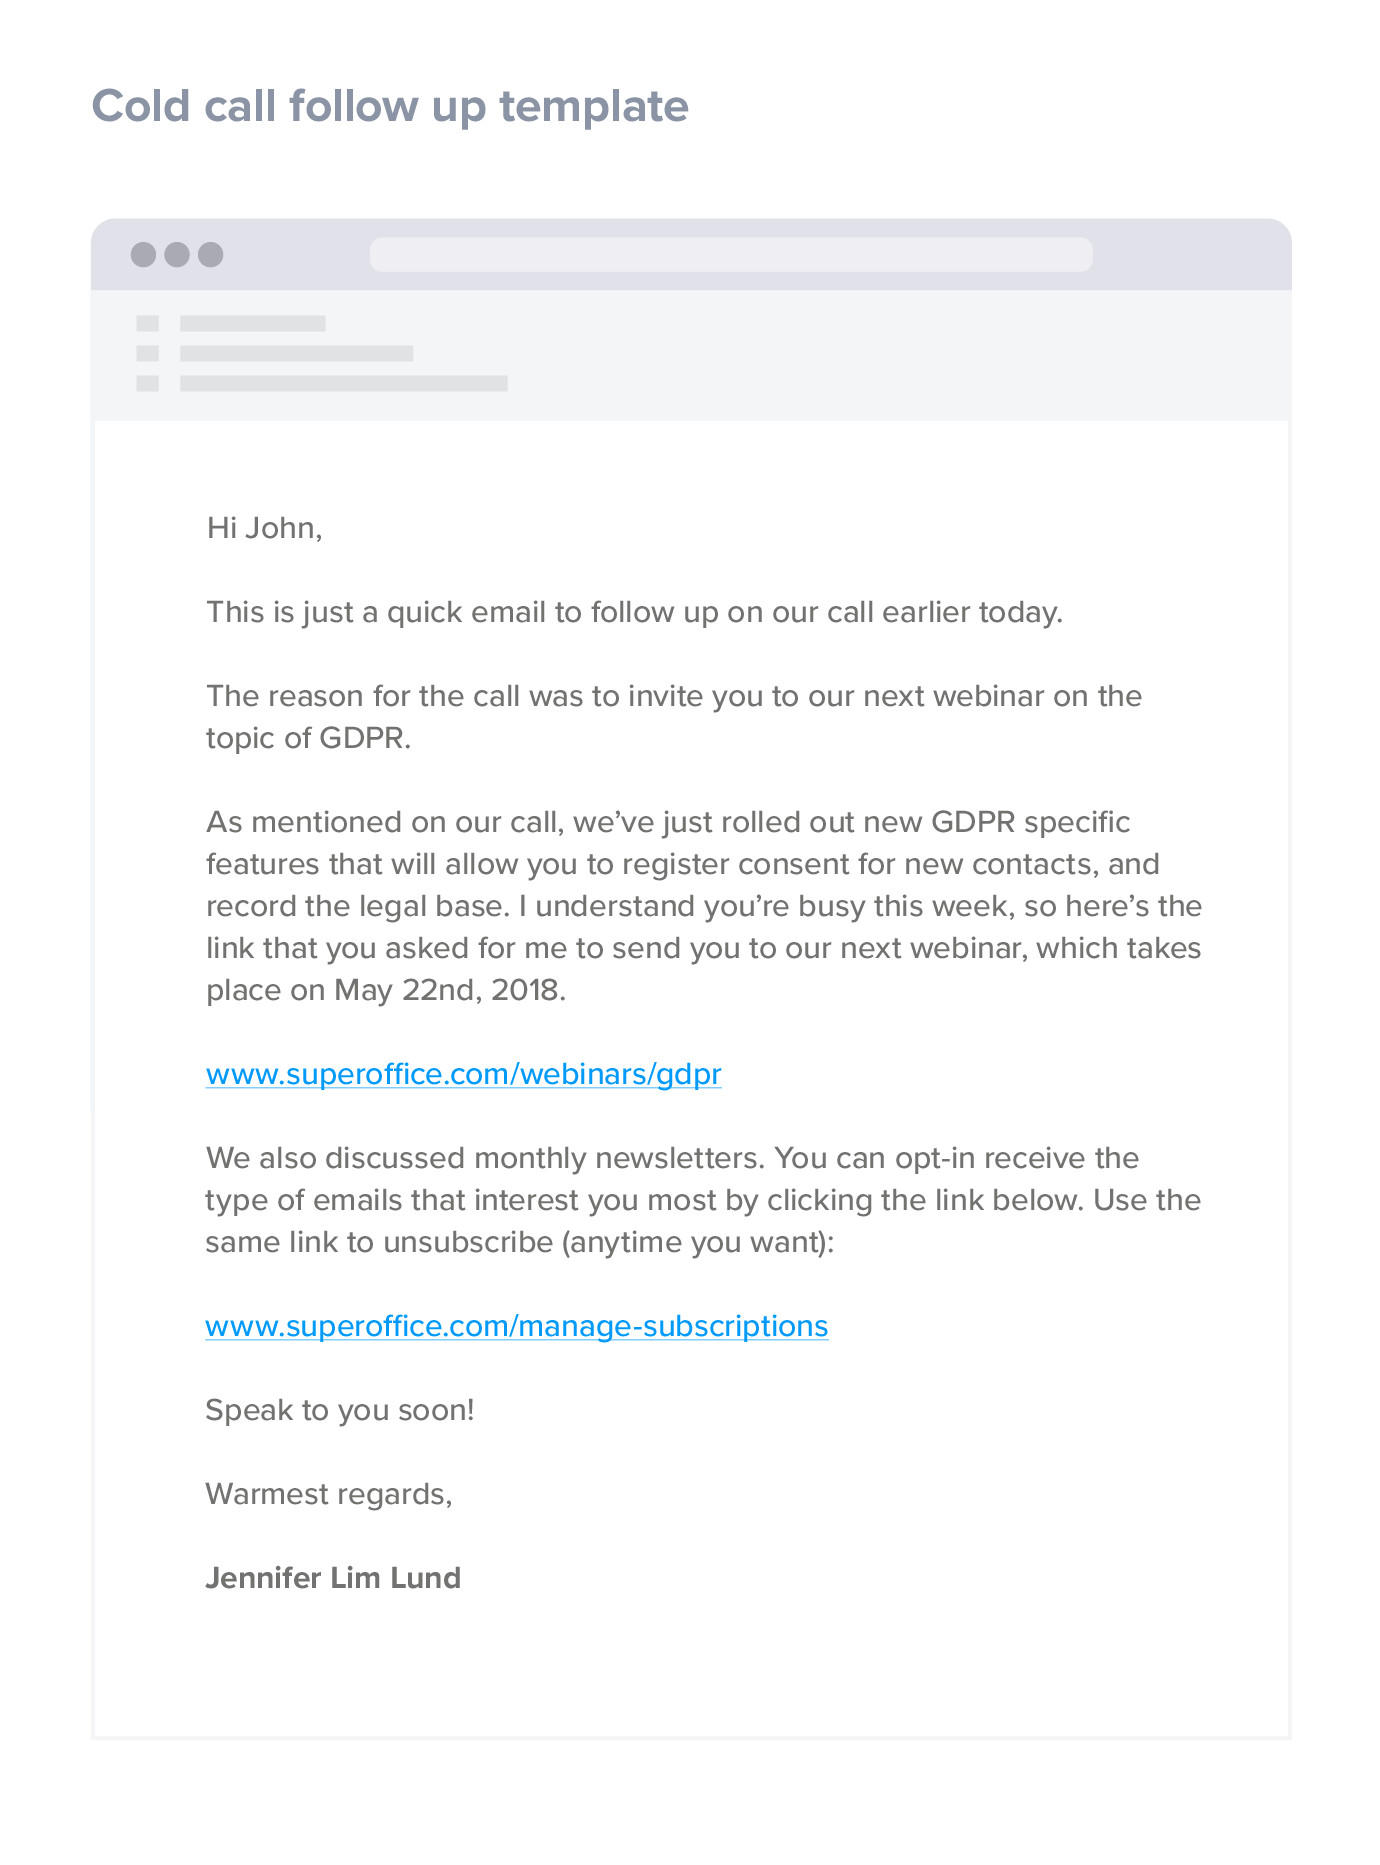 Follow Up Email after Cold Call Template Invite for Internal Meeting Email Sample Invacation1st org